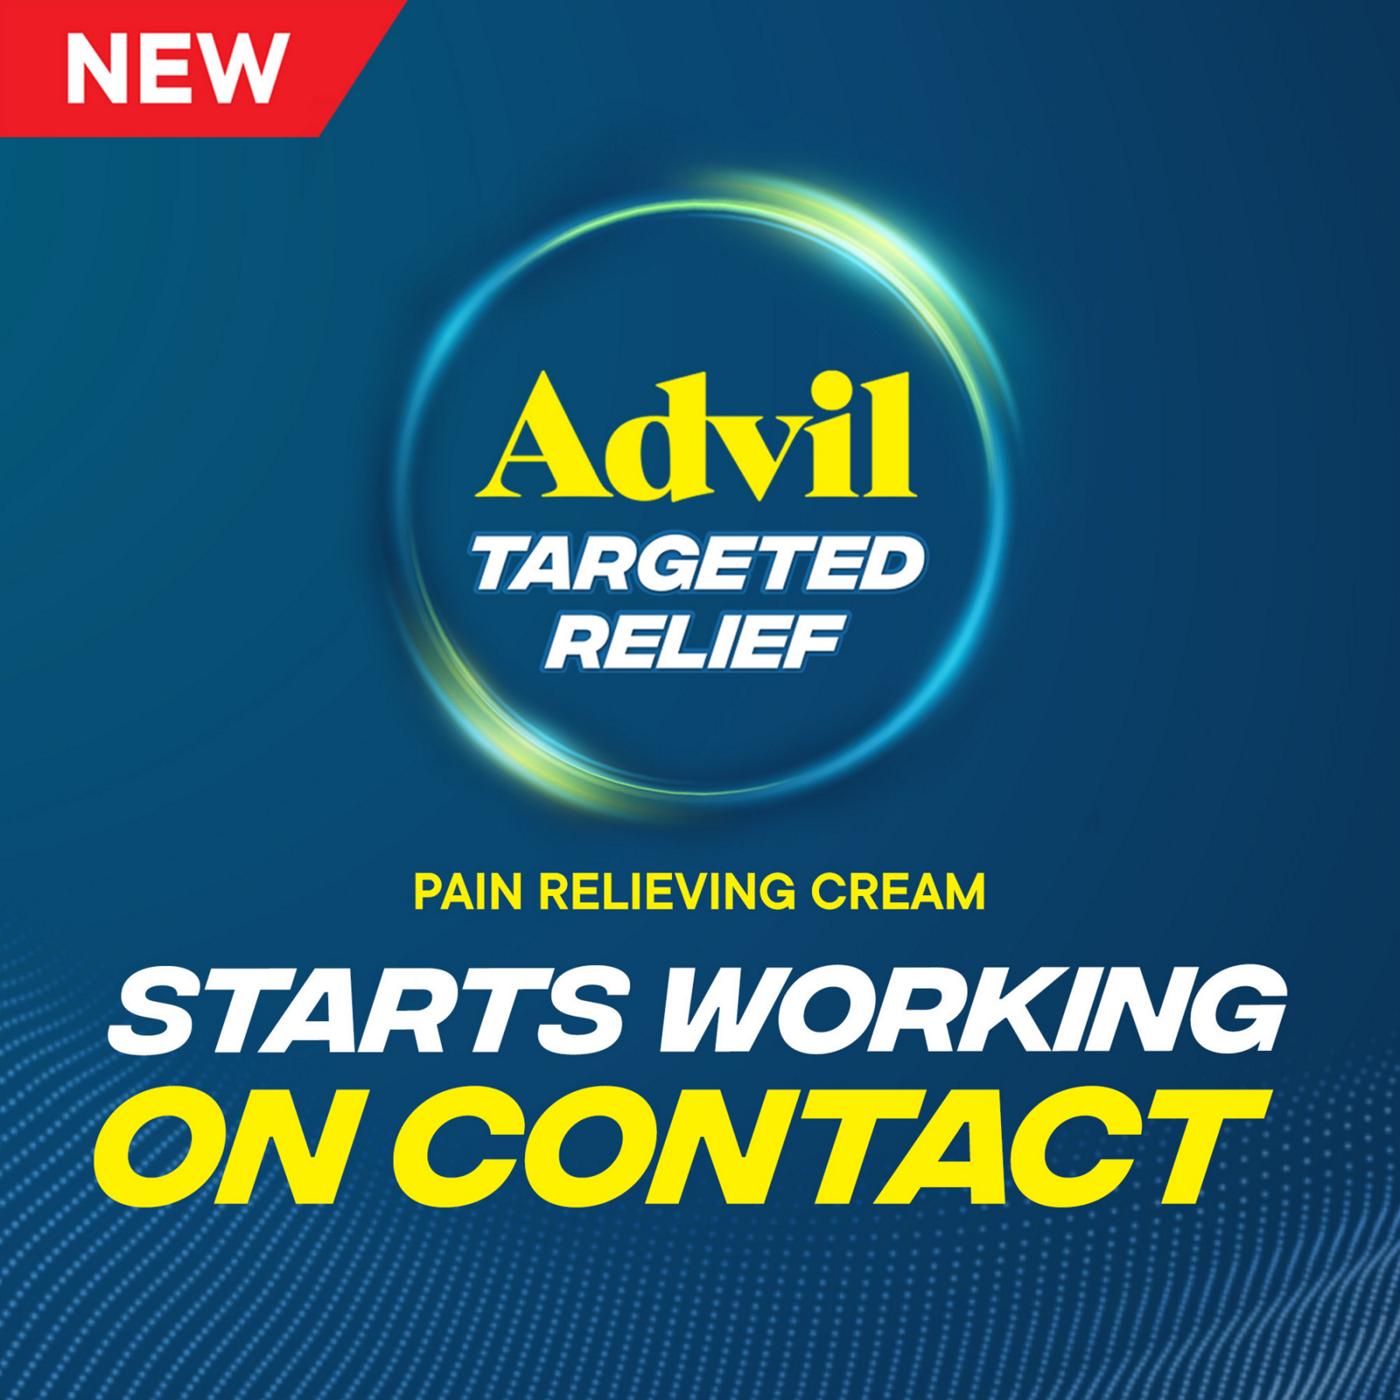 Advil Targeted Relief Pain Relieving Cream; image 7 of 7